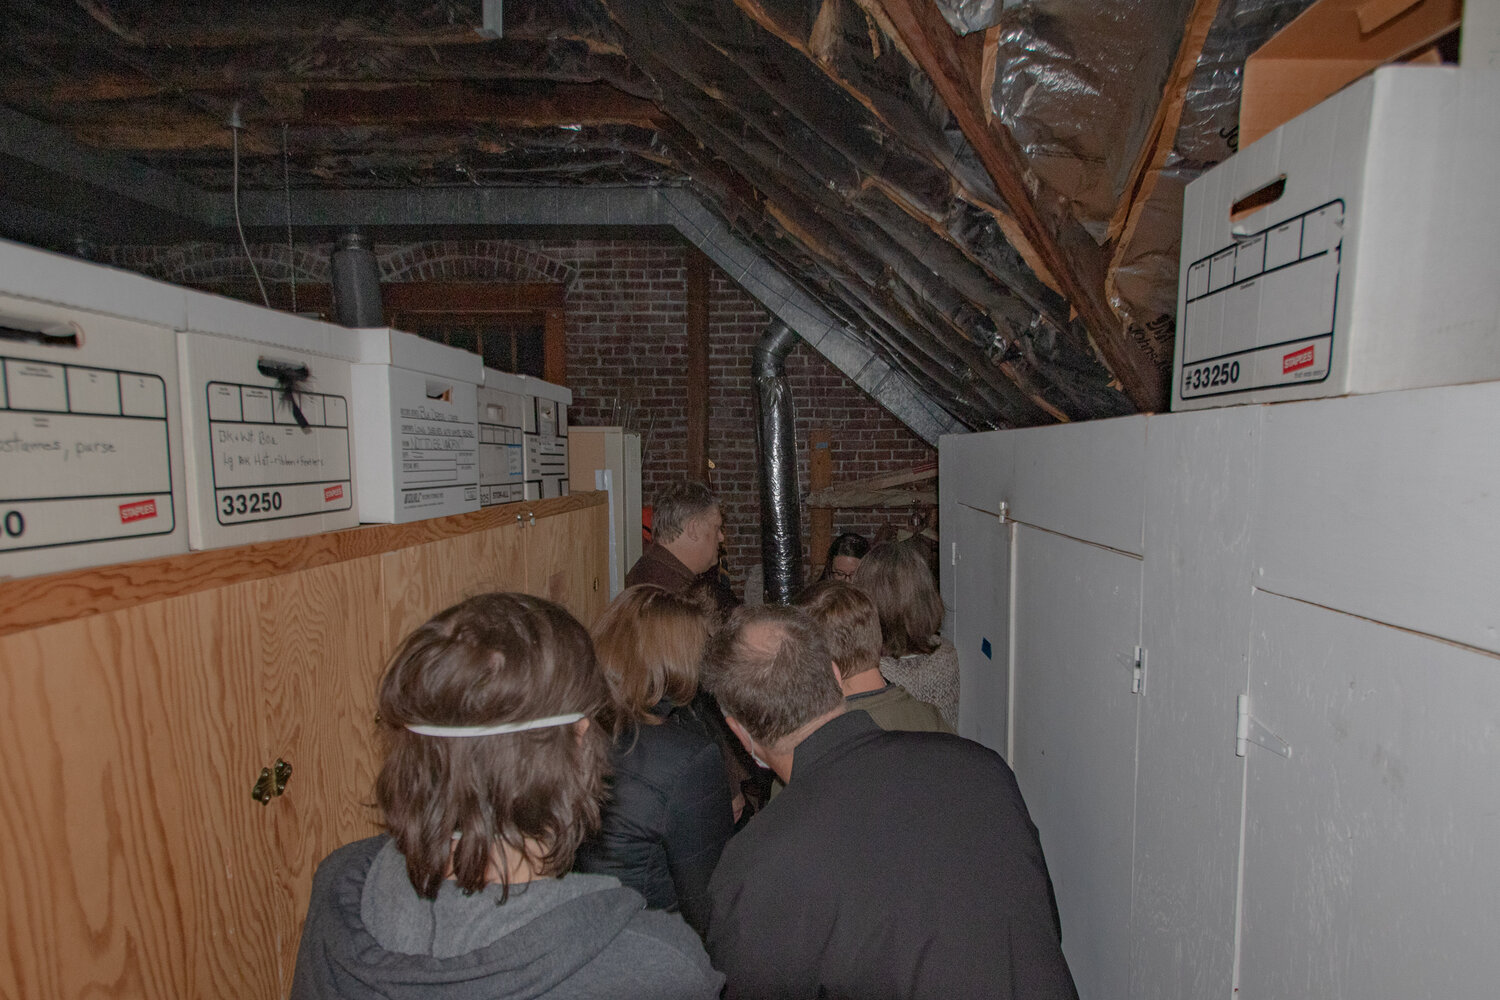 Ghost tour attendees gather in the attic of the Lewis County Historical Museum on Saturday, Oct. 28, to listen to electronic voice phenomenon captured on audio recorders by paranormal investigators at the museum in the past.